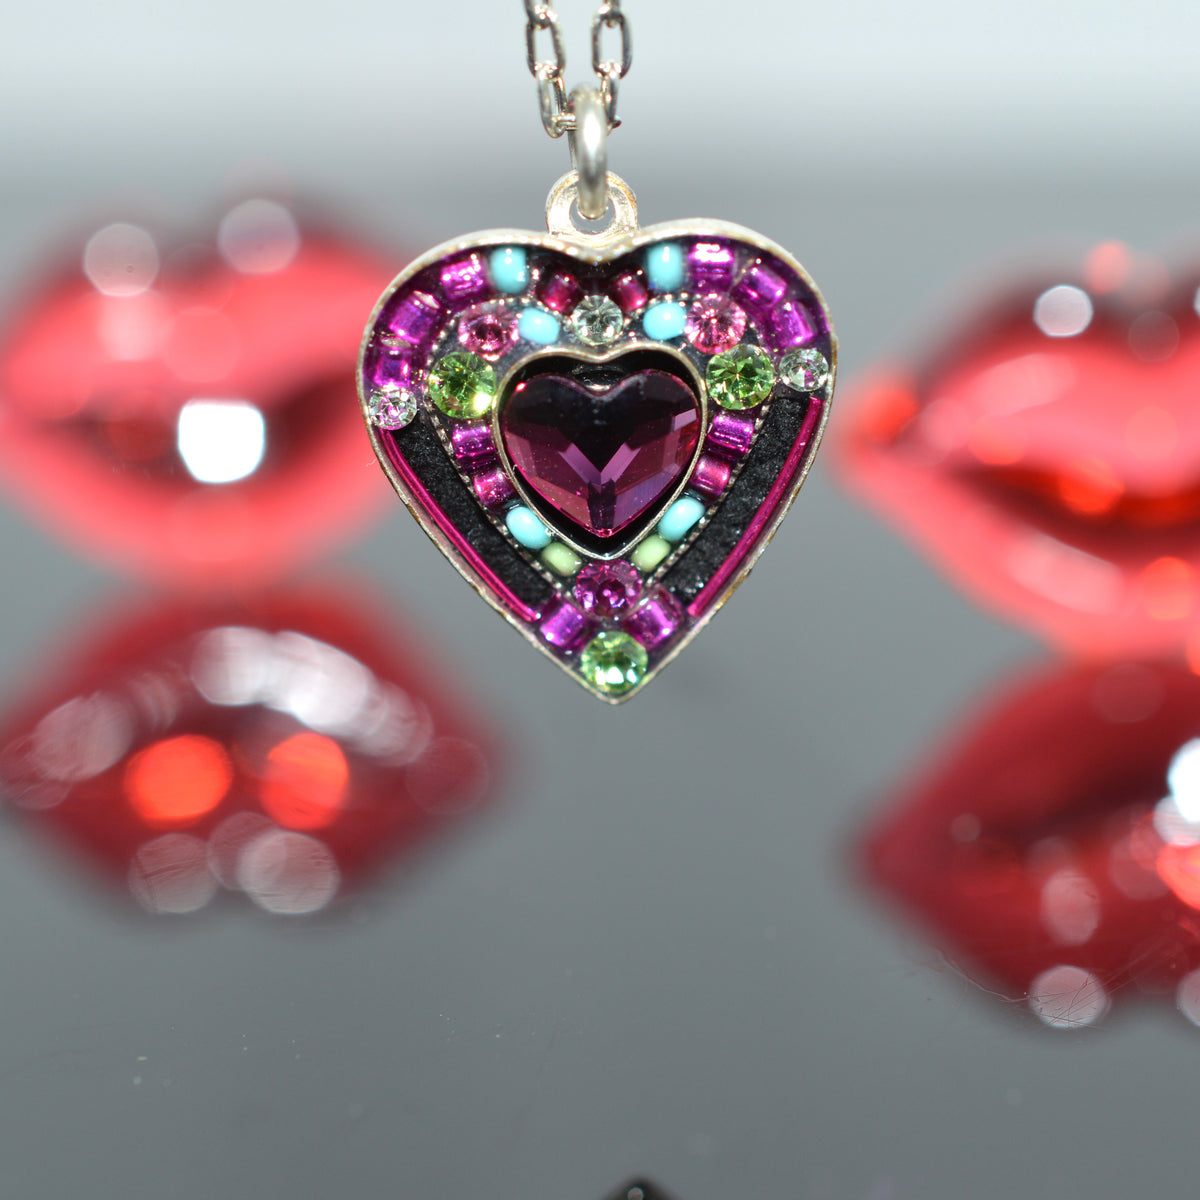 Antique Silver Plated  Rose Crystal Heart Pendant by Firefly